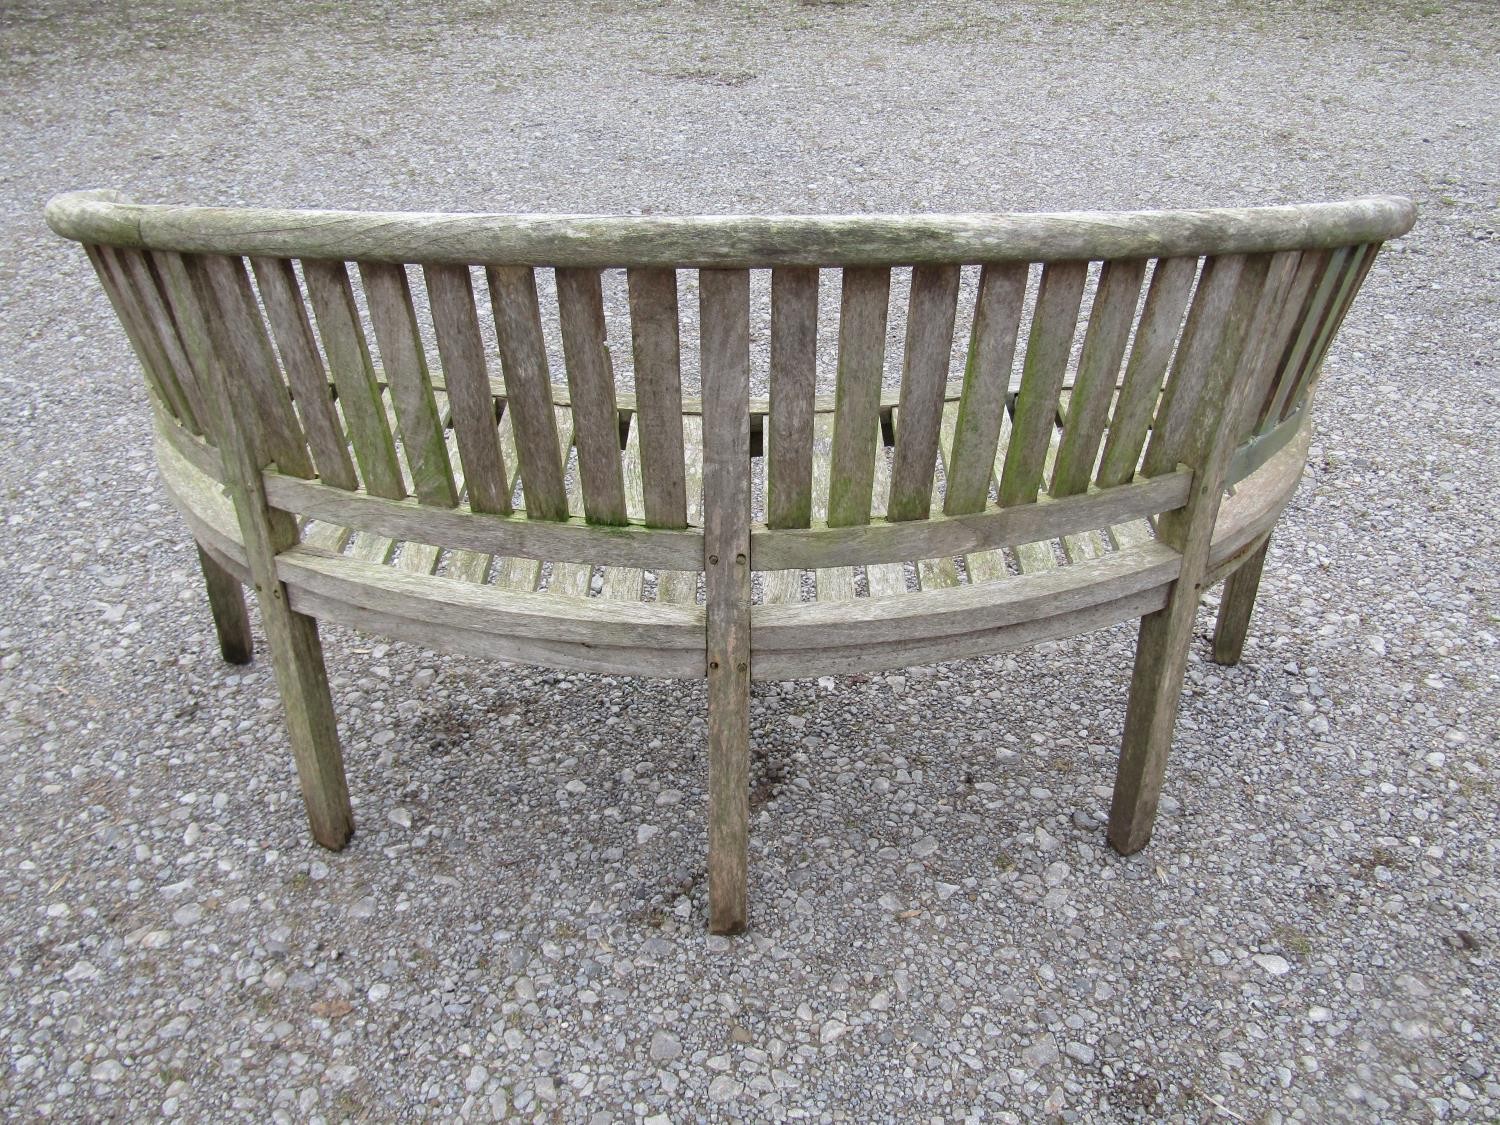 A pair of weathered teak banana shaped garden benches with loose seat cushions, 160 cm wide - Image 5 of 5